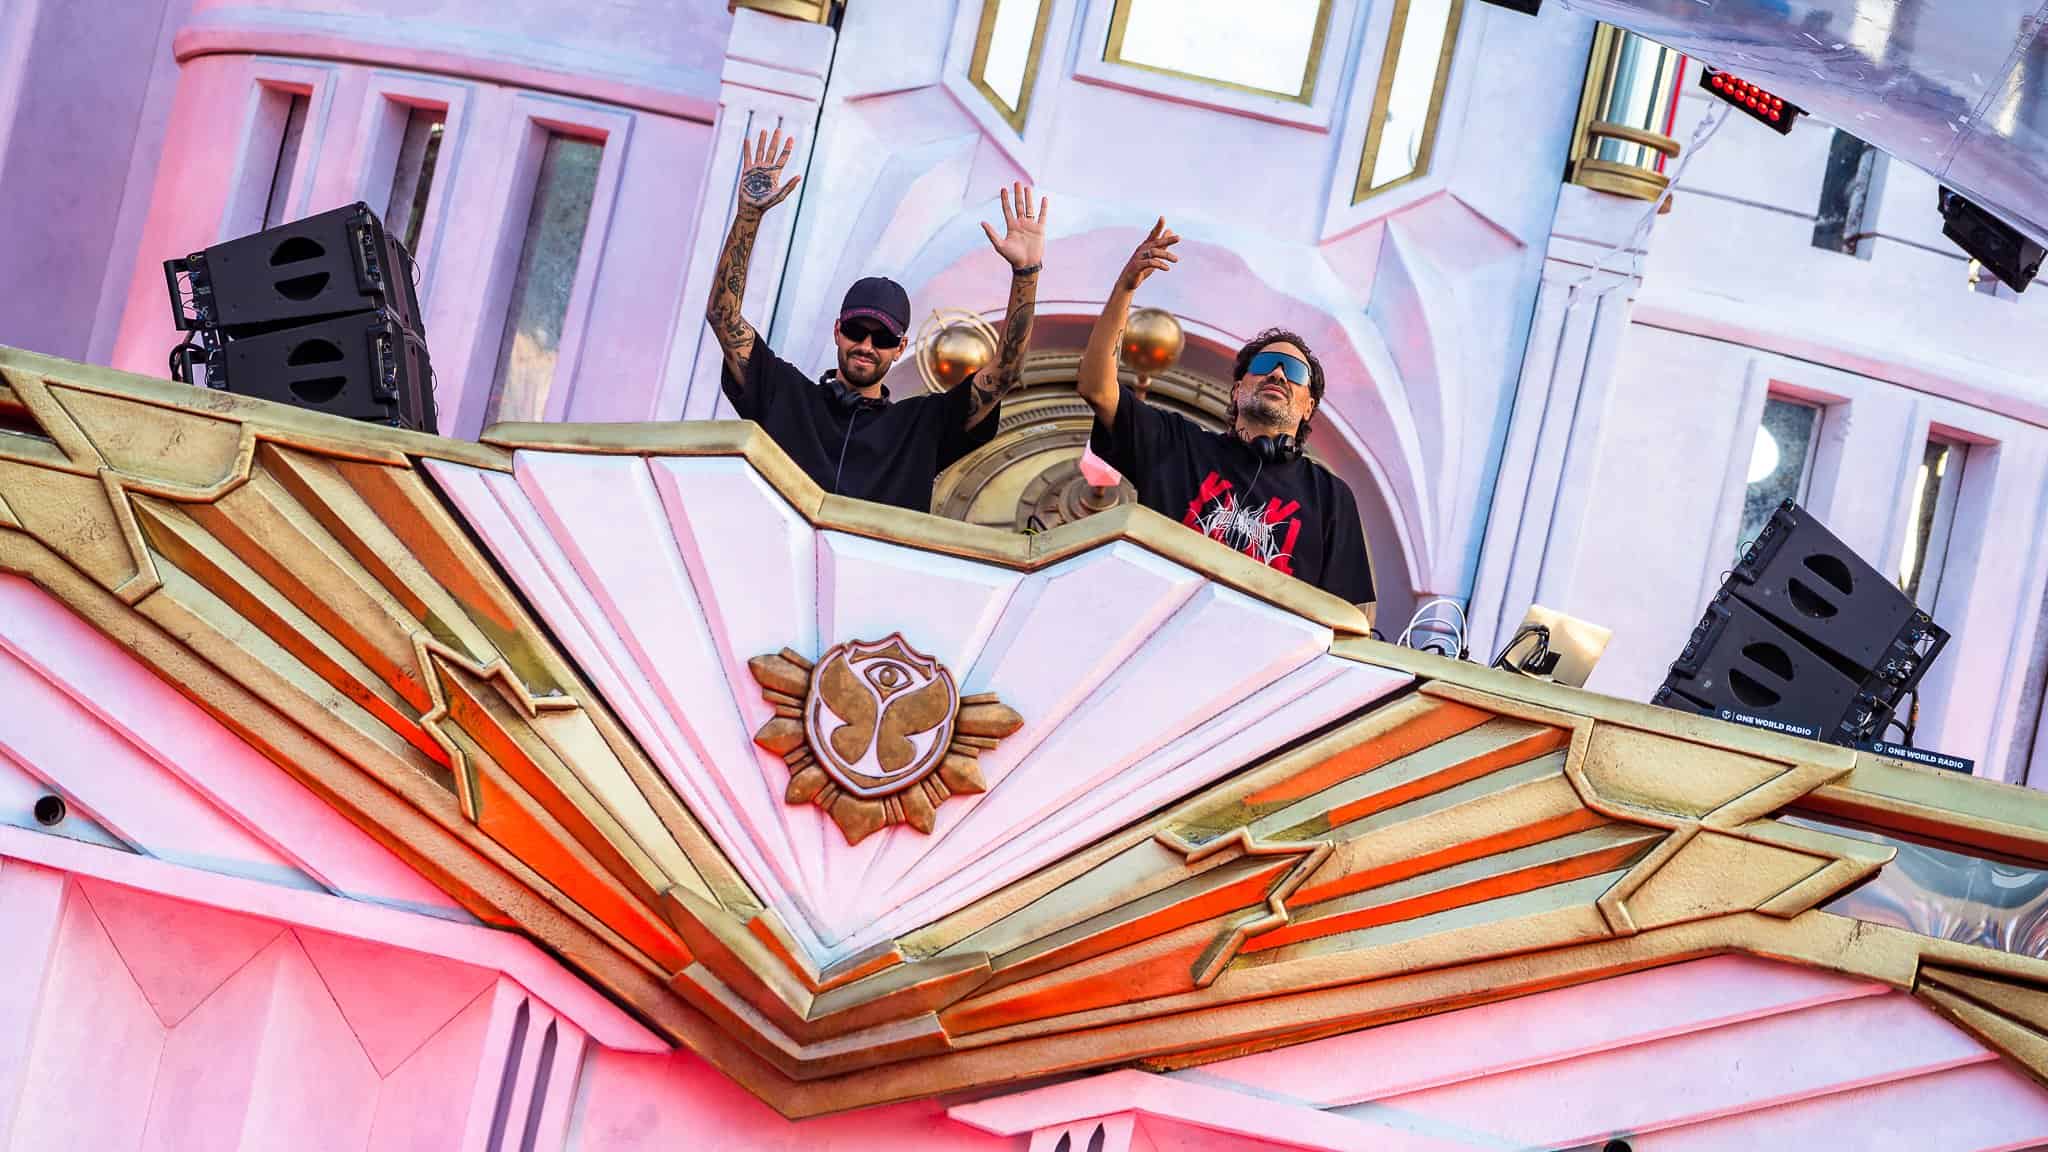 Tale Of Us bring an ID-filled set to the Afterlife stage at Tomorrowland 2022 W3: Watch